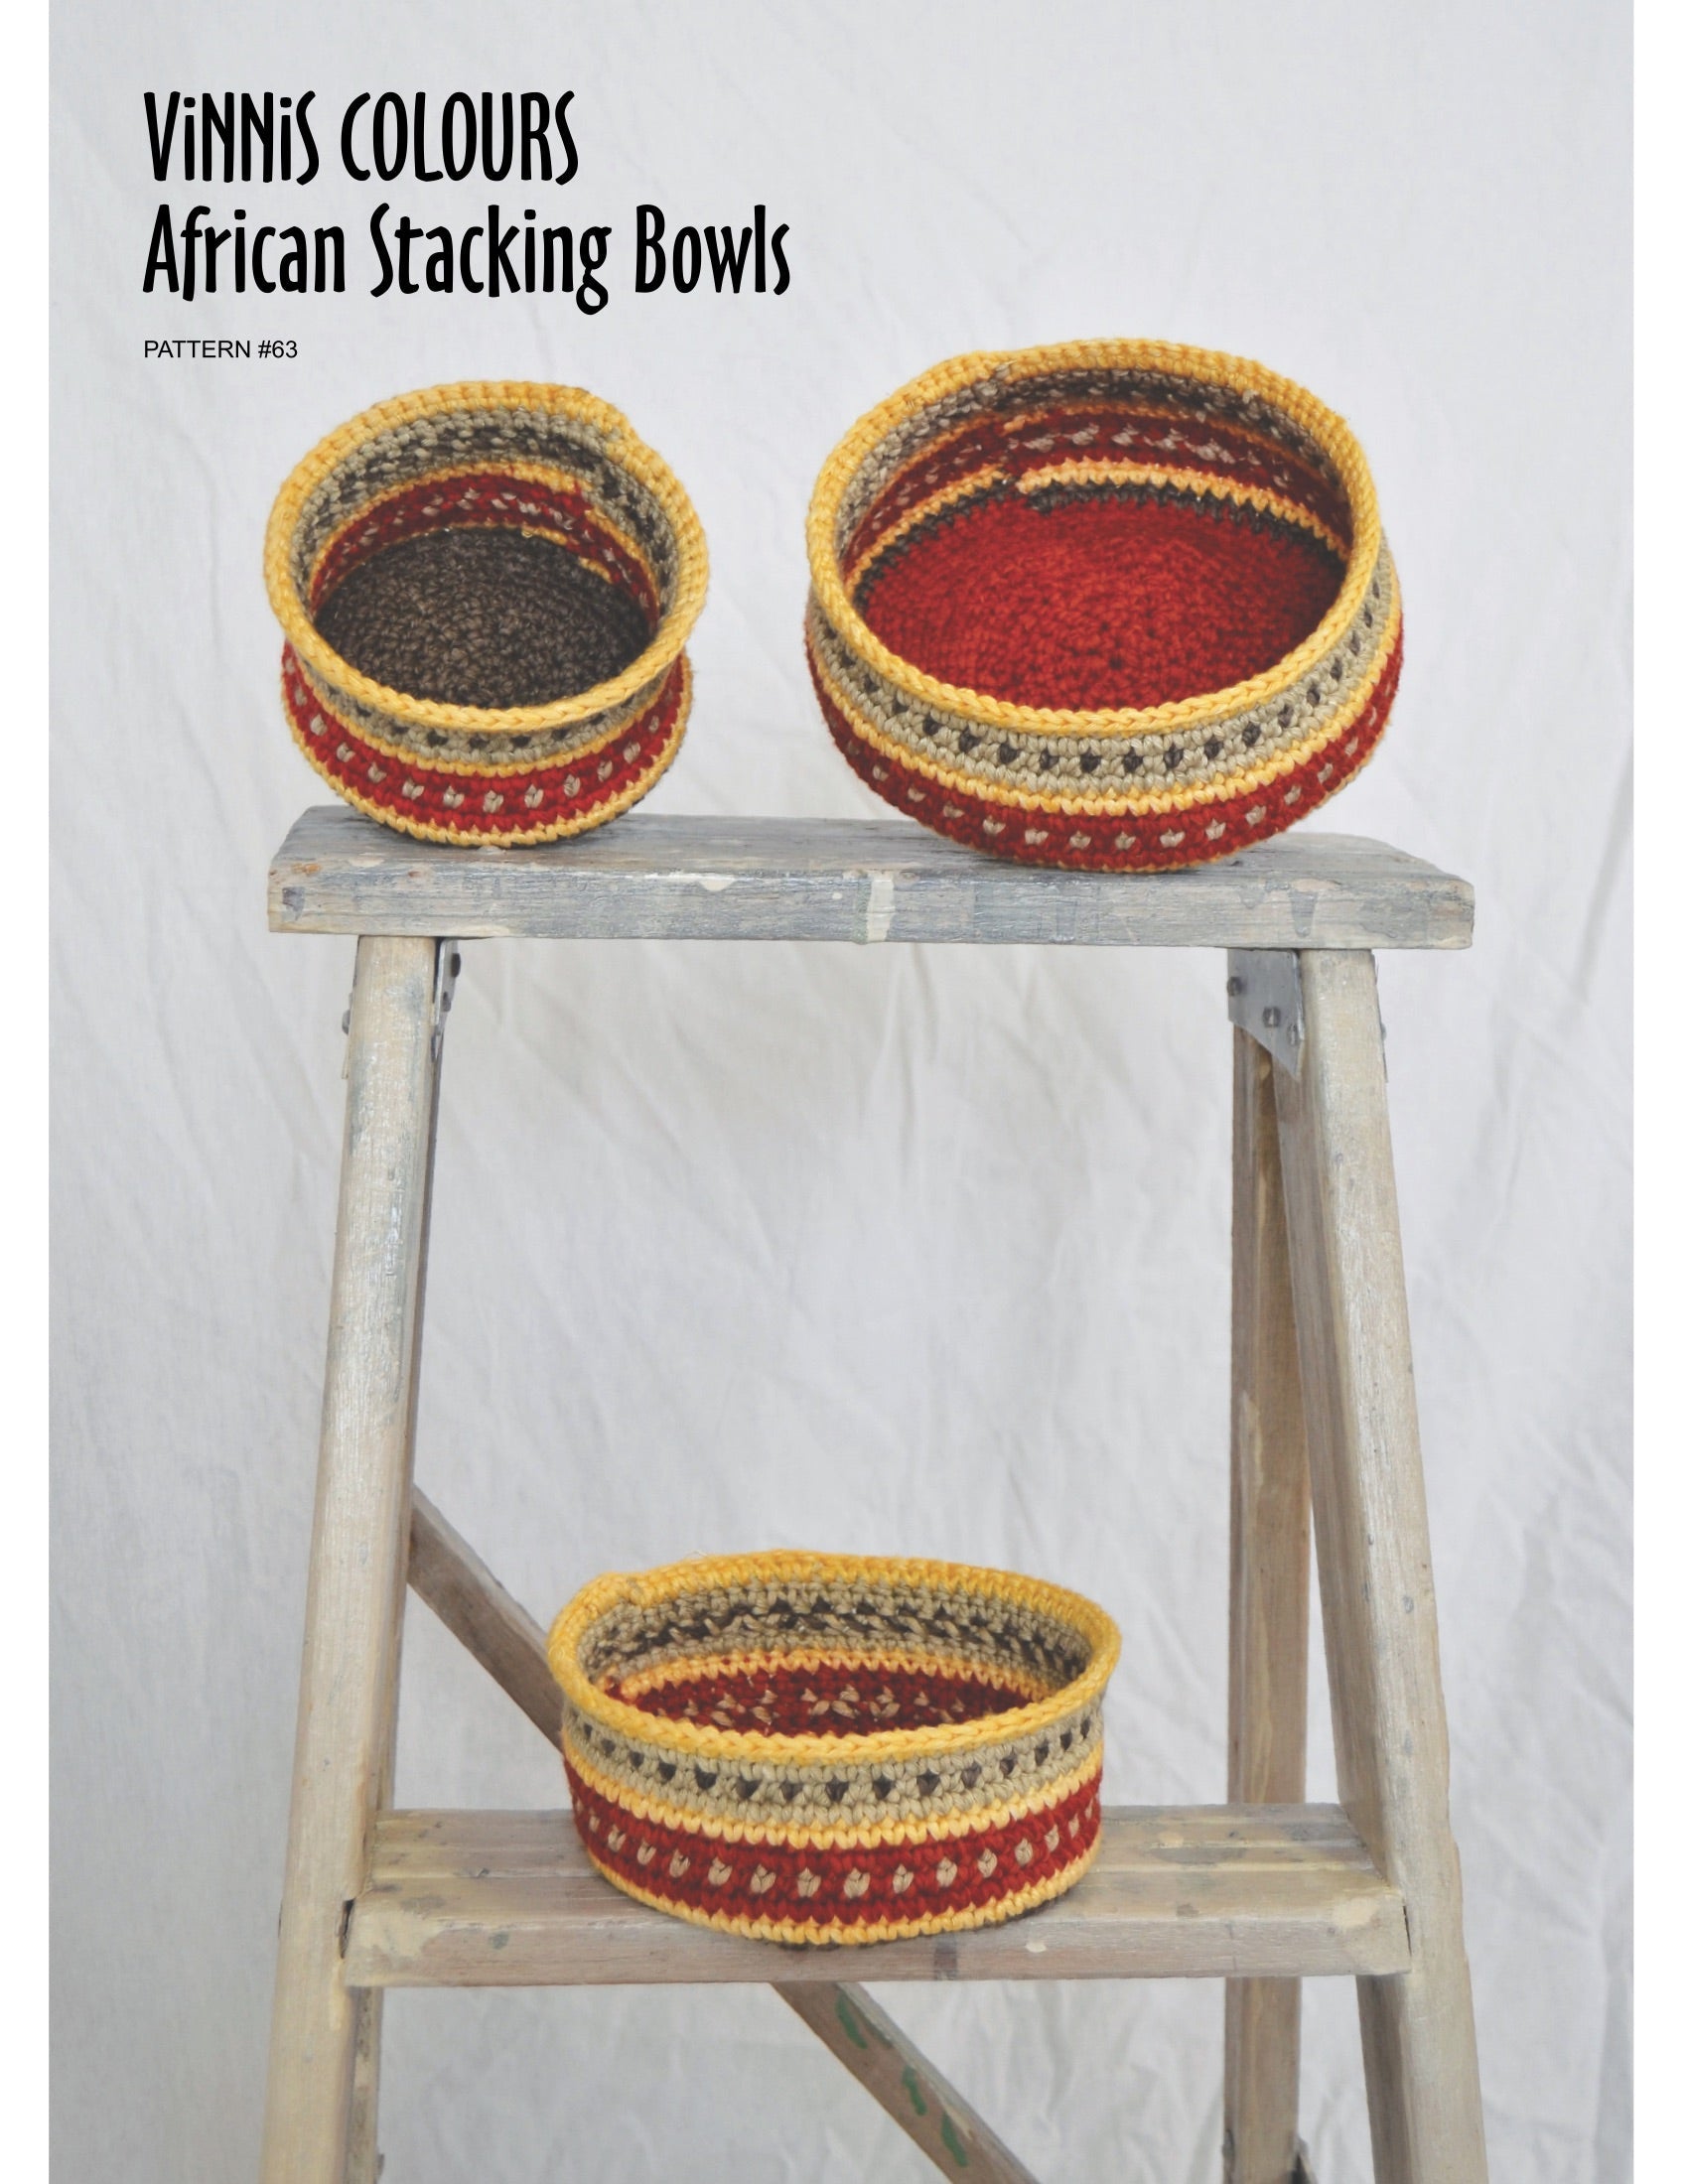 VCPK - P063 - African Stacking Bowls